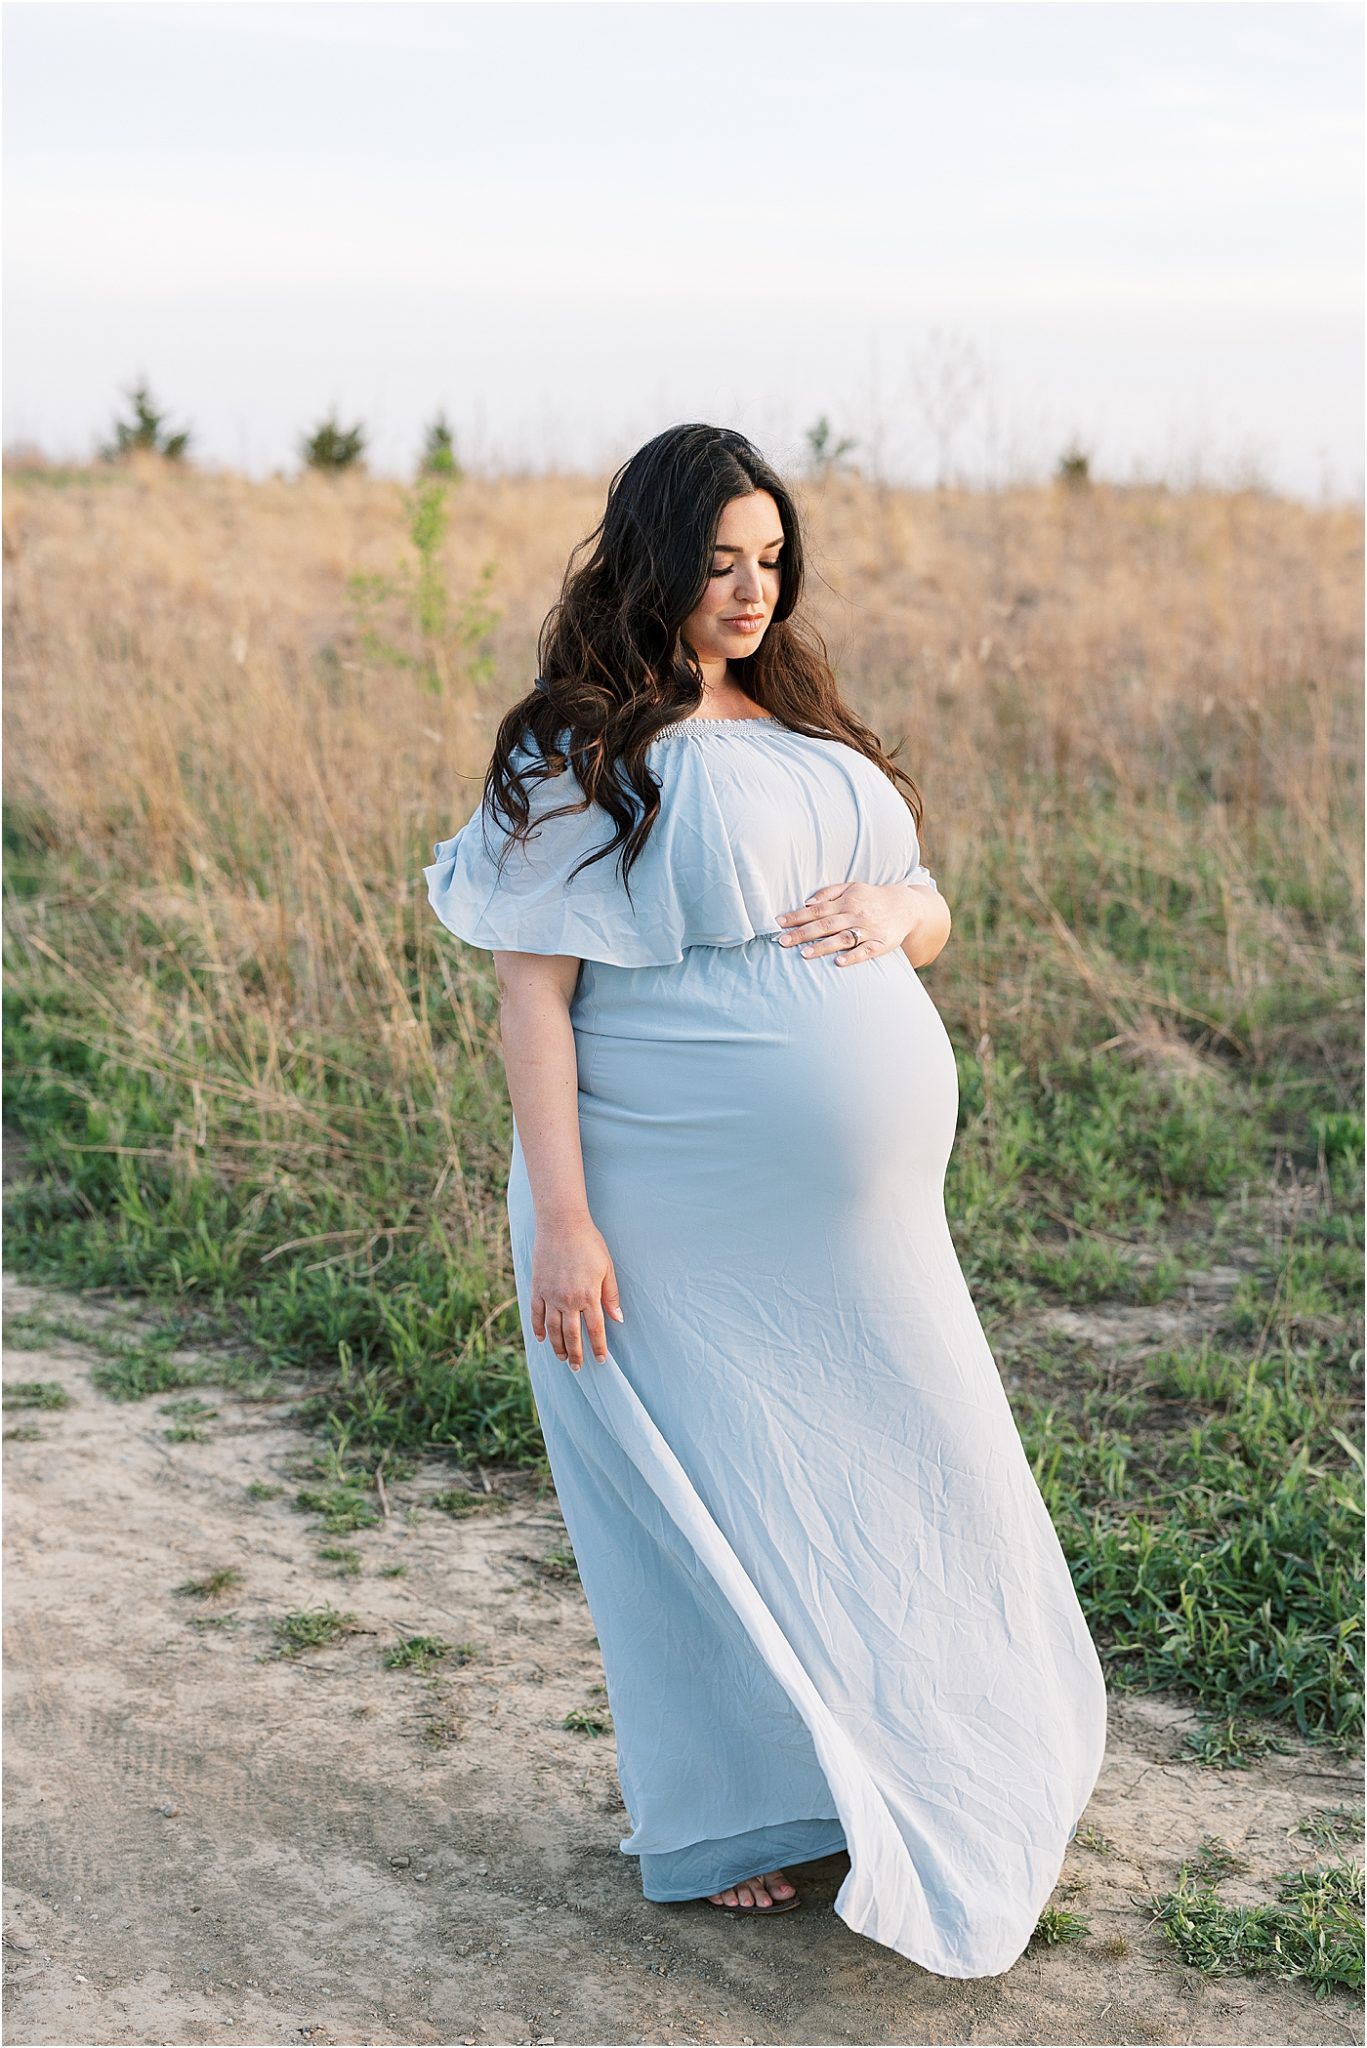 Sunset maternity session in Fishers, Indiana | Lindsay Konopa Photography